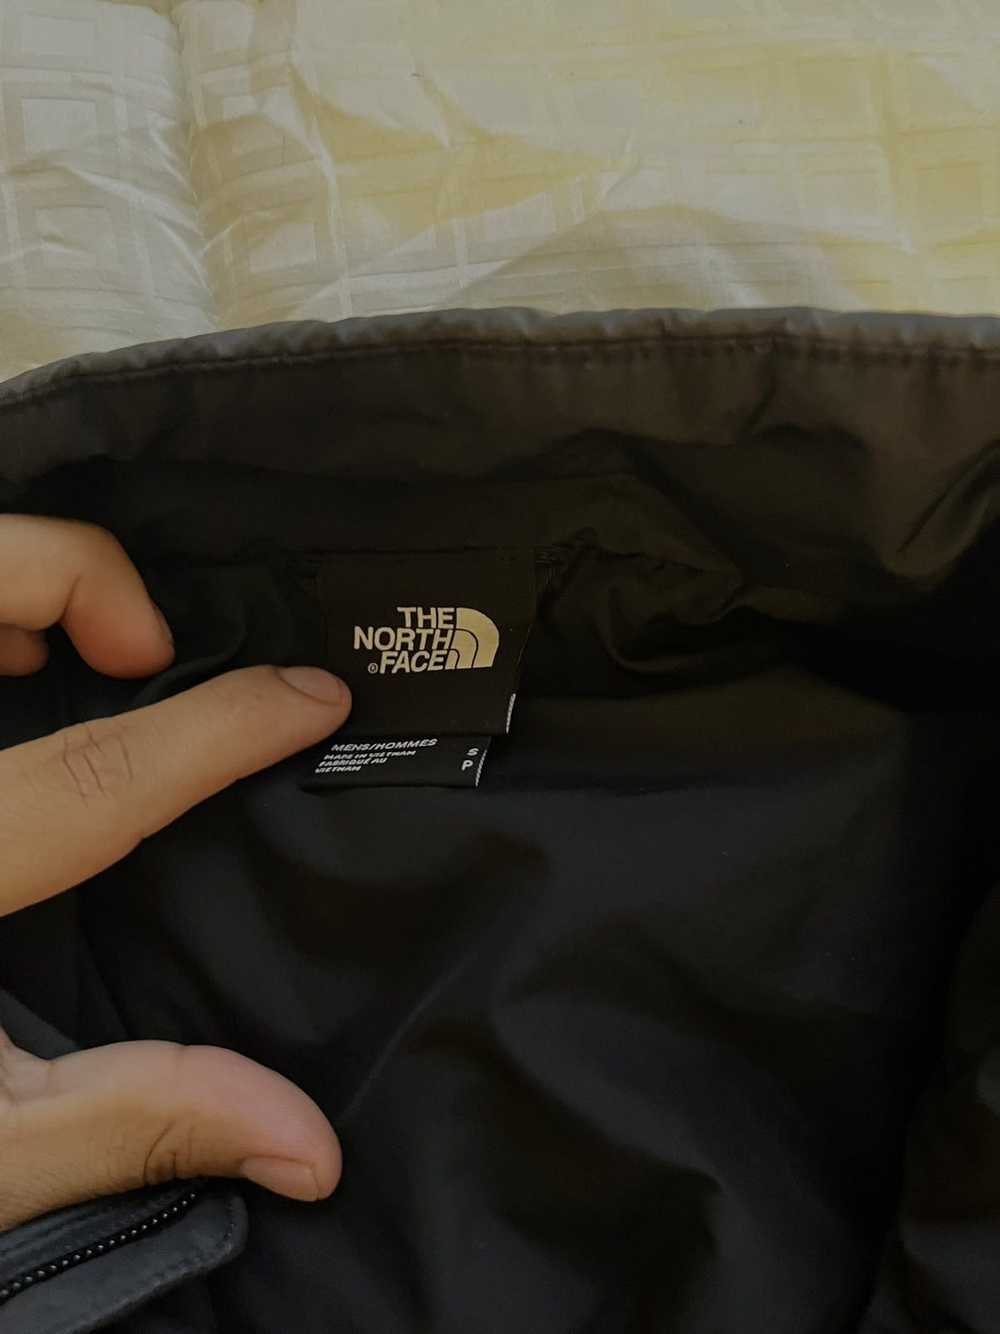 The North Face North Face Jacket - image 4